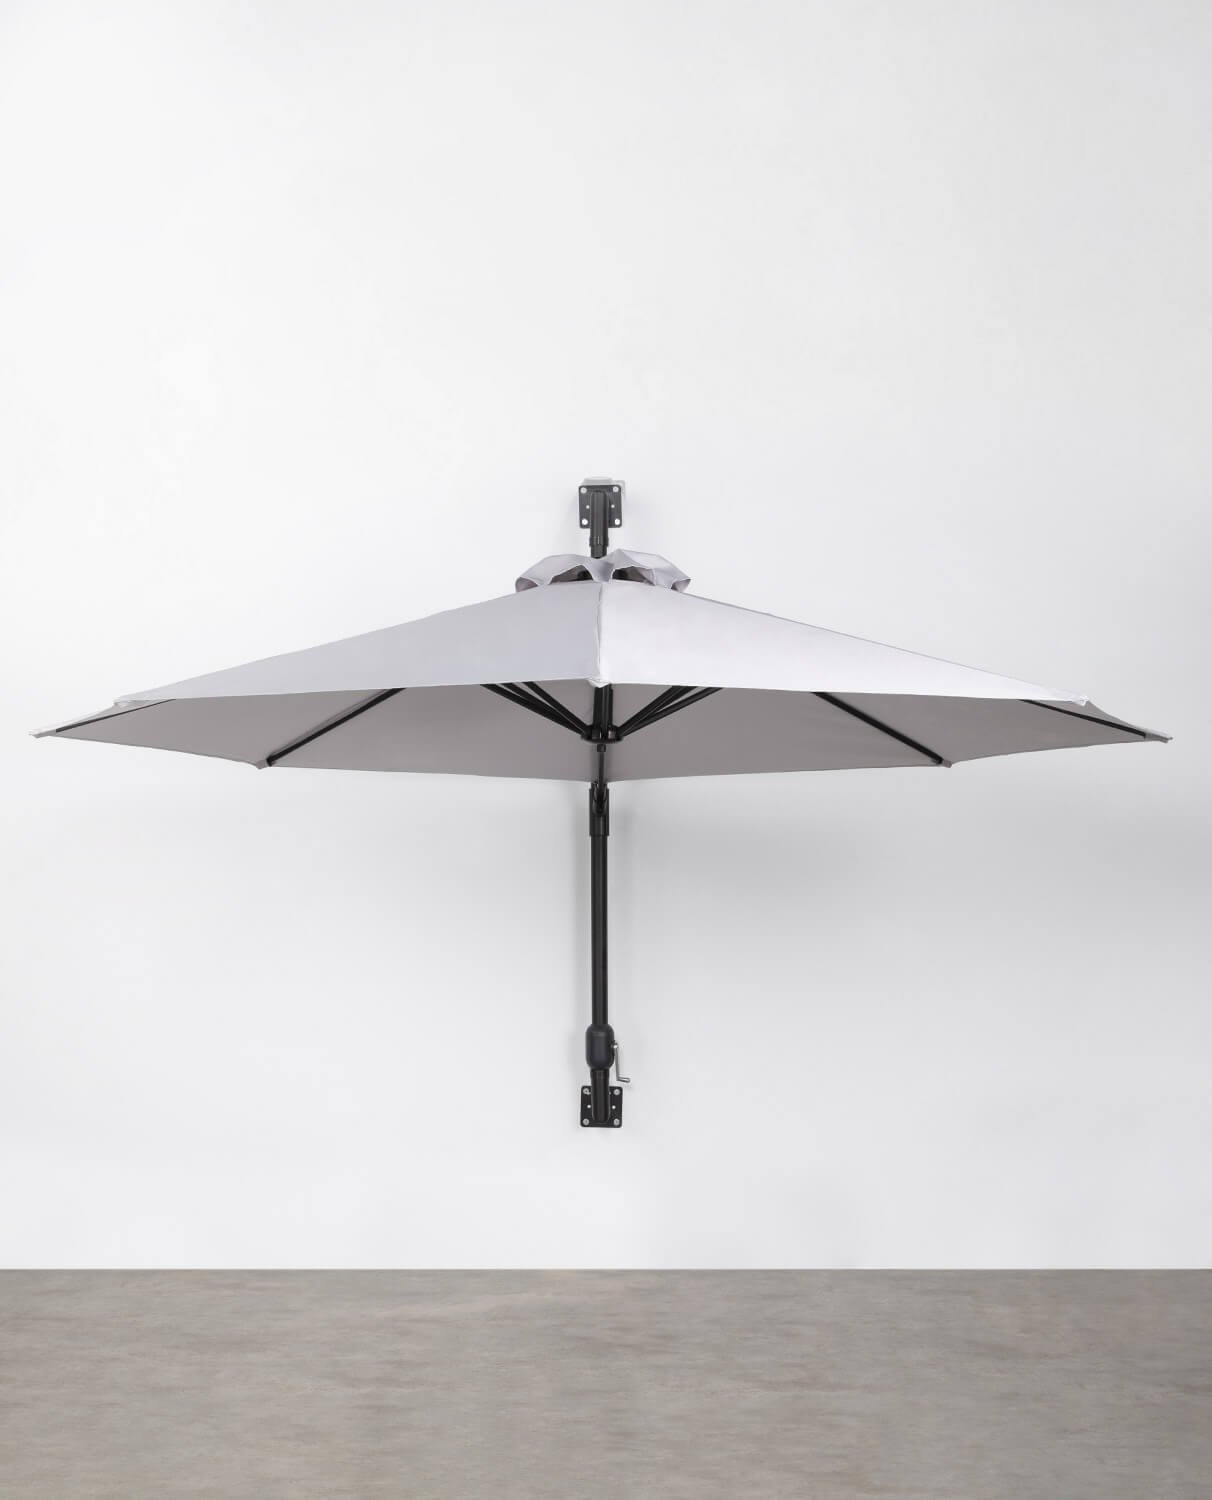 Garden and Terrace Wall Parasol (266x276 cm) Irom, gallery image 1